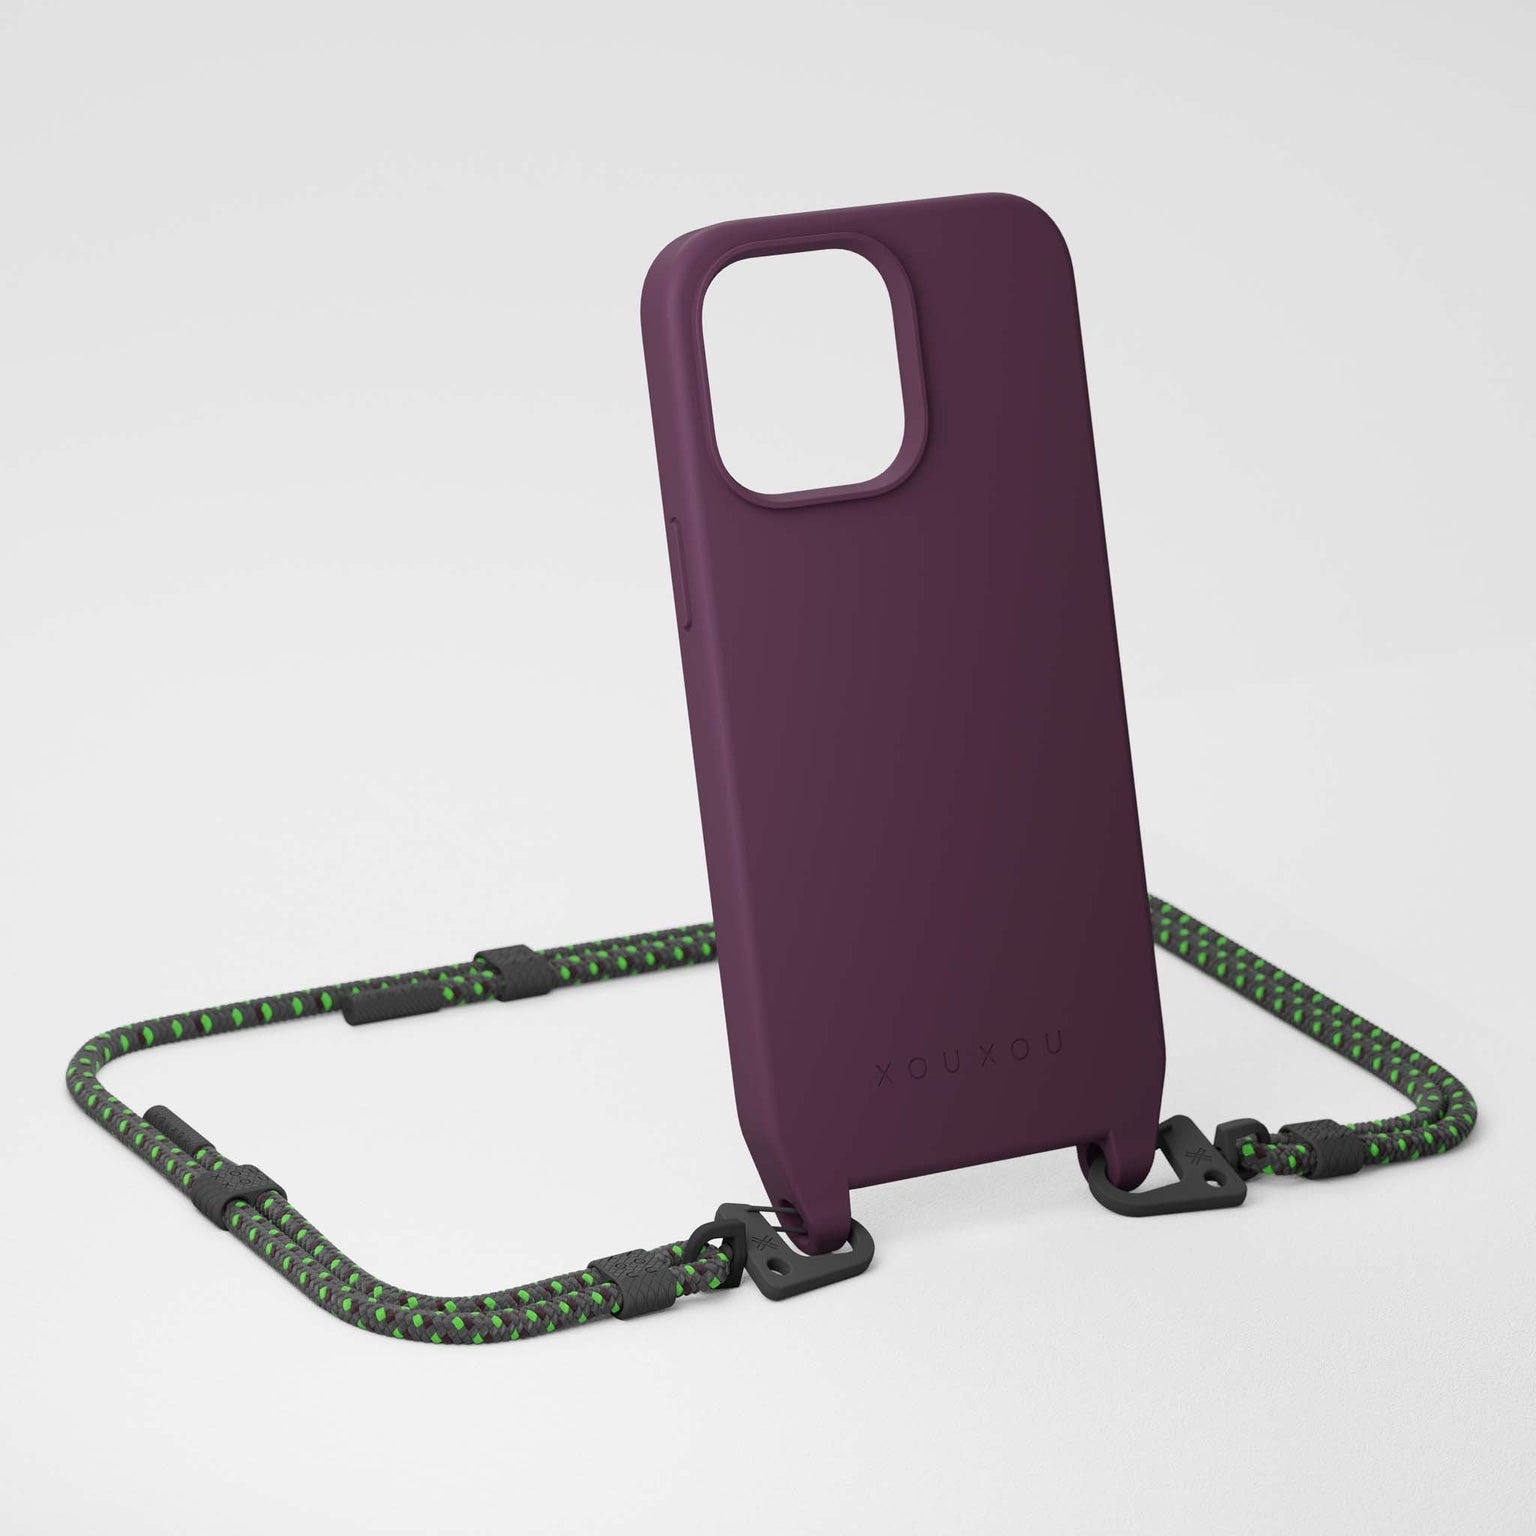 Burgundy iPhone Case with Ash Grey Carabiner Rope | XOUXOU